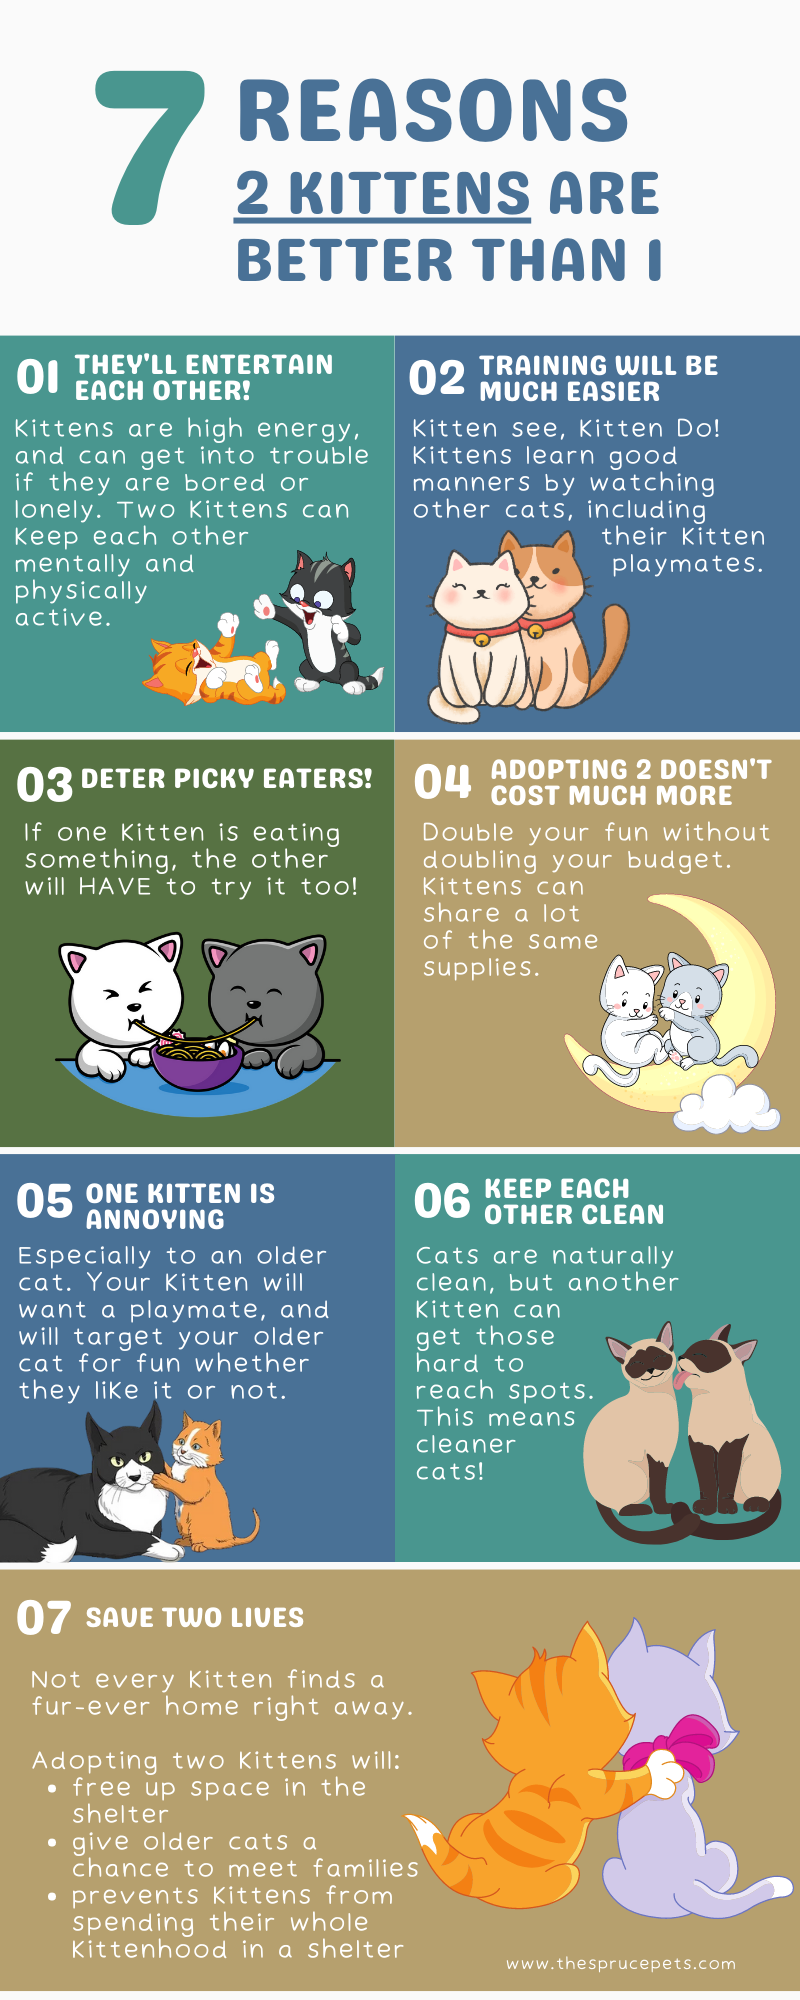 7 reasons 2 kittens are better than one